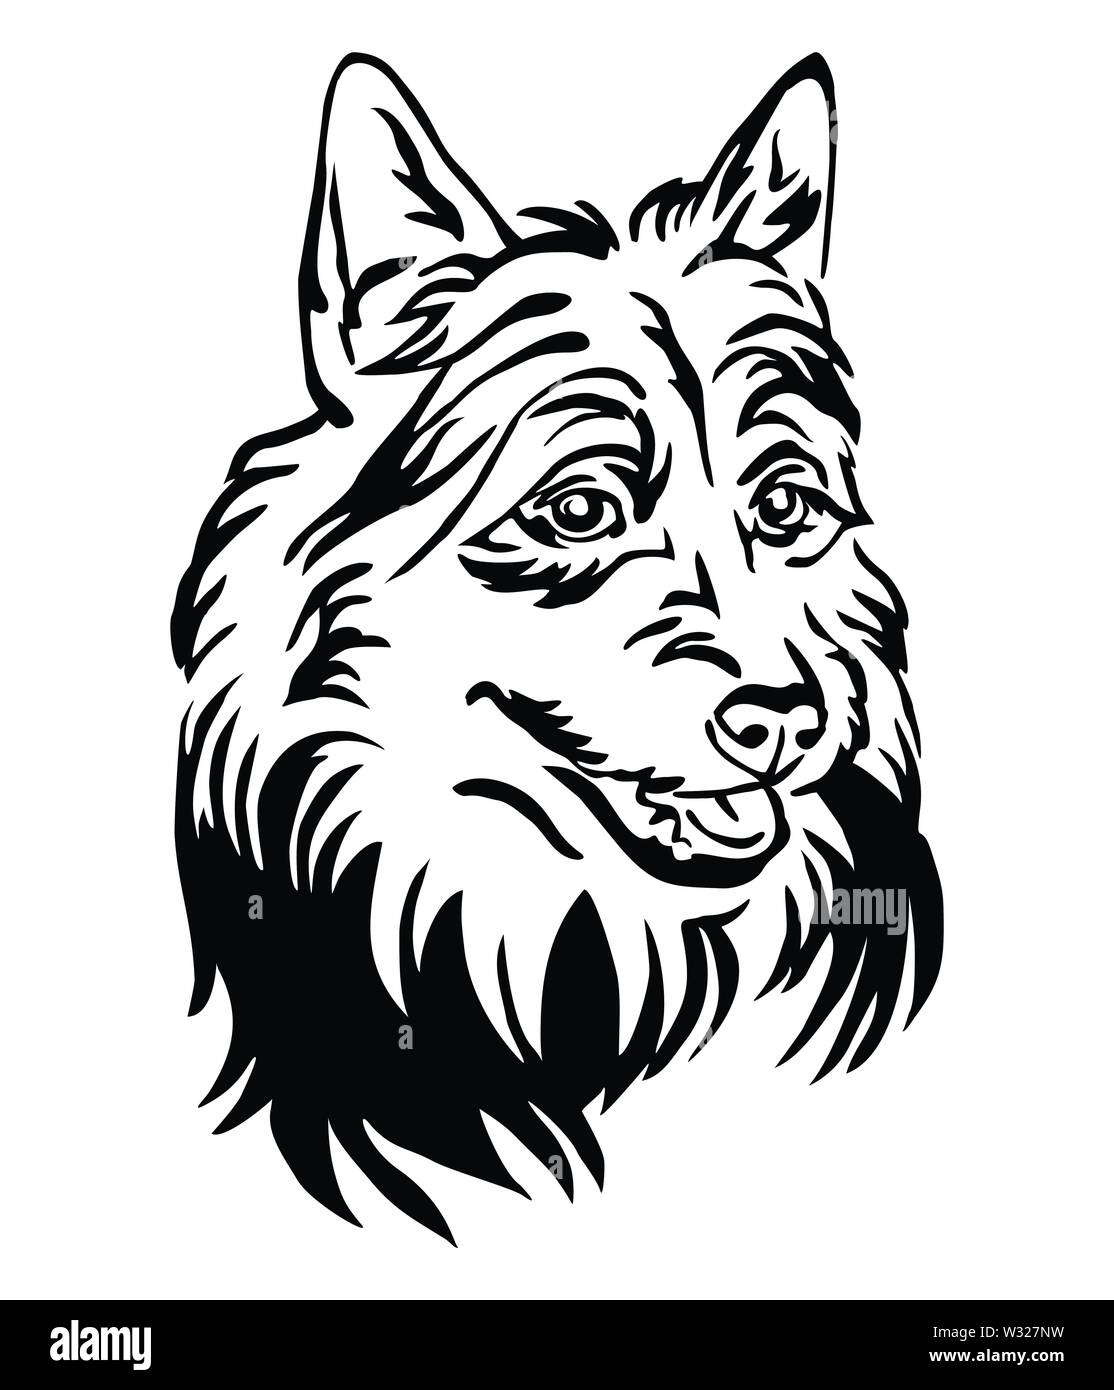 Decorative Outline Portrait Of Dog Australian Terrier Vector Illustration In Black Color Isolated On White Background Image For Design And Tattoo Stock Vector Image Art Alamy